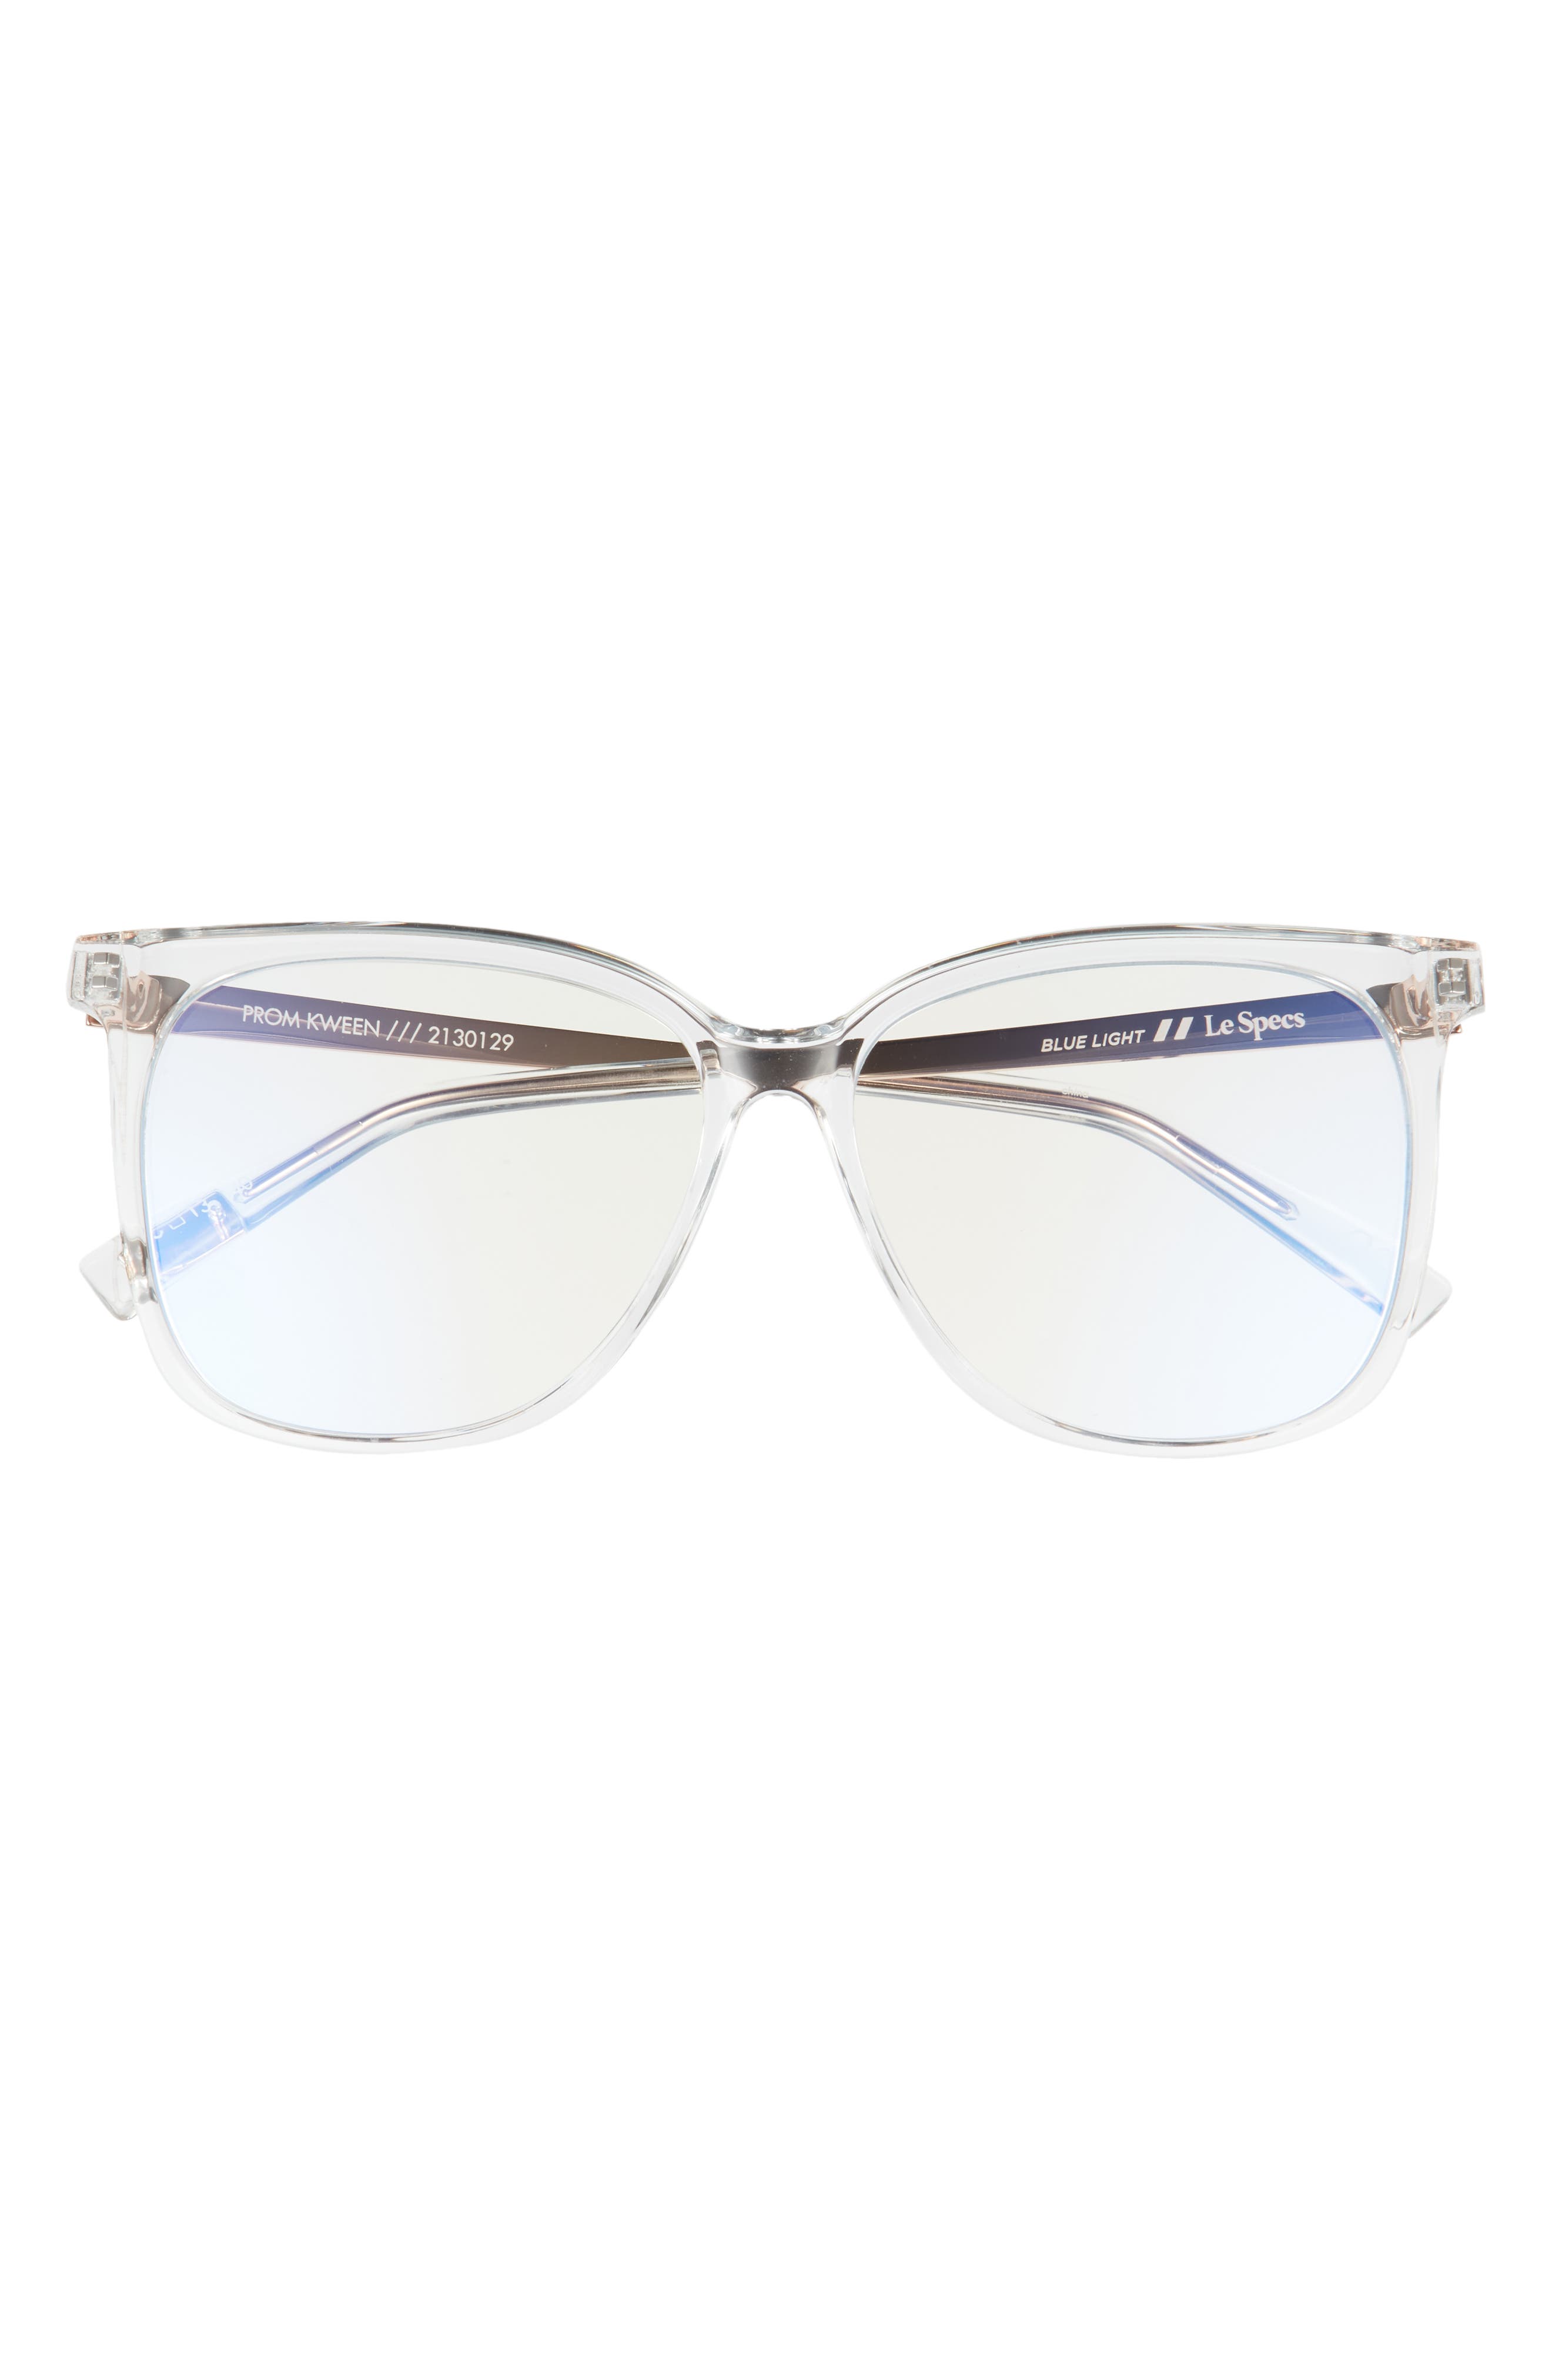 Le Specs Prom Kween 55mm Square Blue Light Blocking Glasses in Clear /Anti Blue Light at Nordstrom